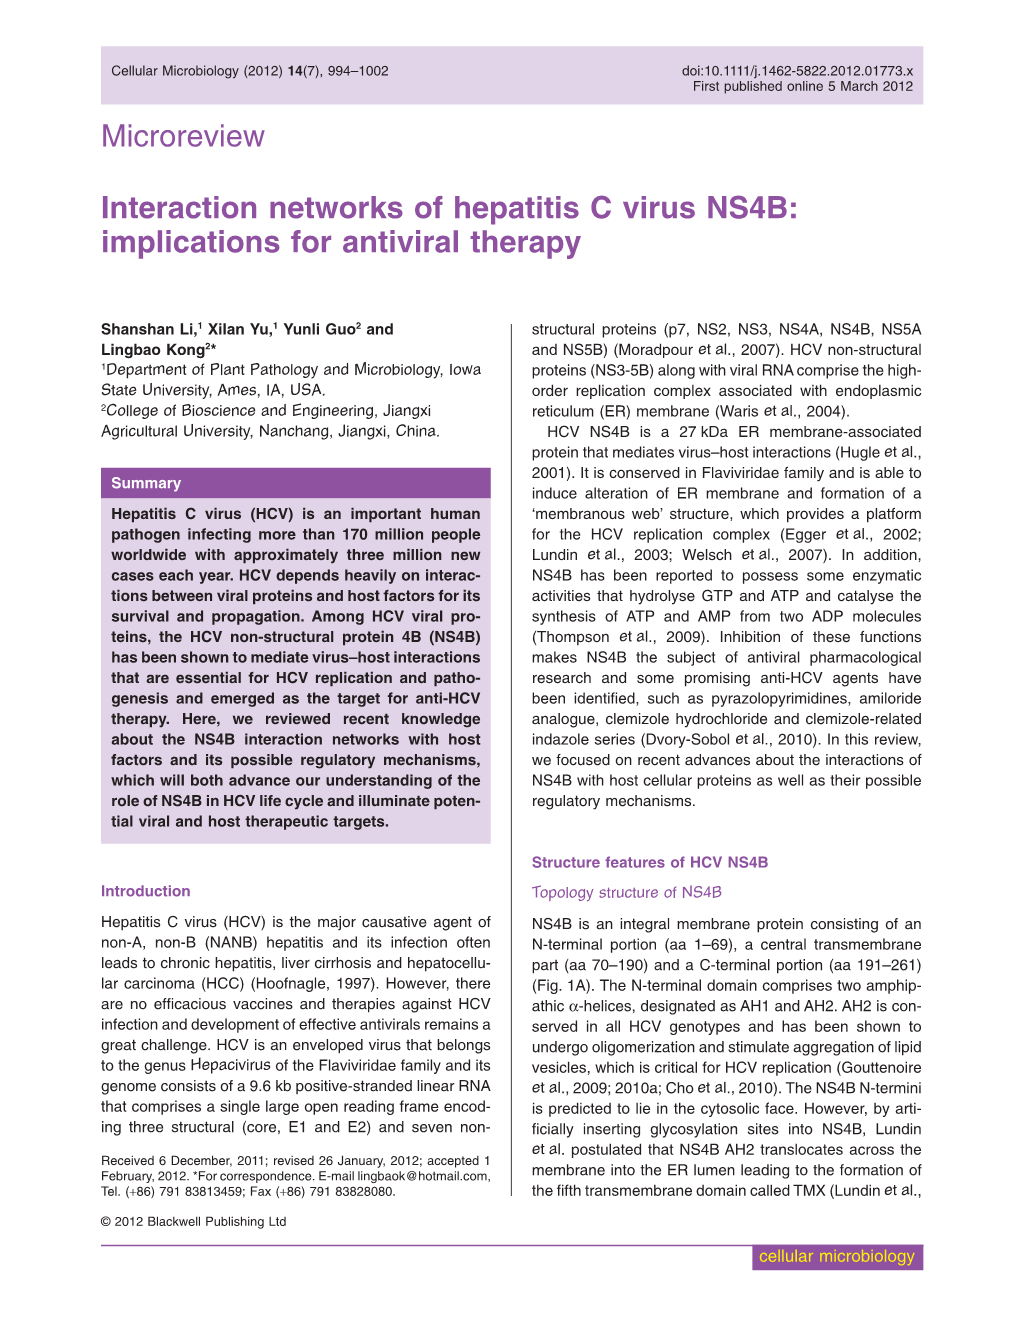 Interaction Networks of Hepatitis C Virus NS4B: Implications for Antiviral Therapy